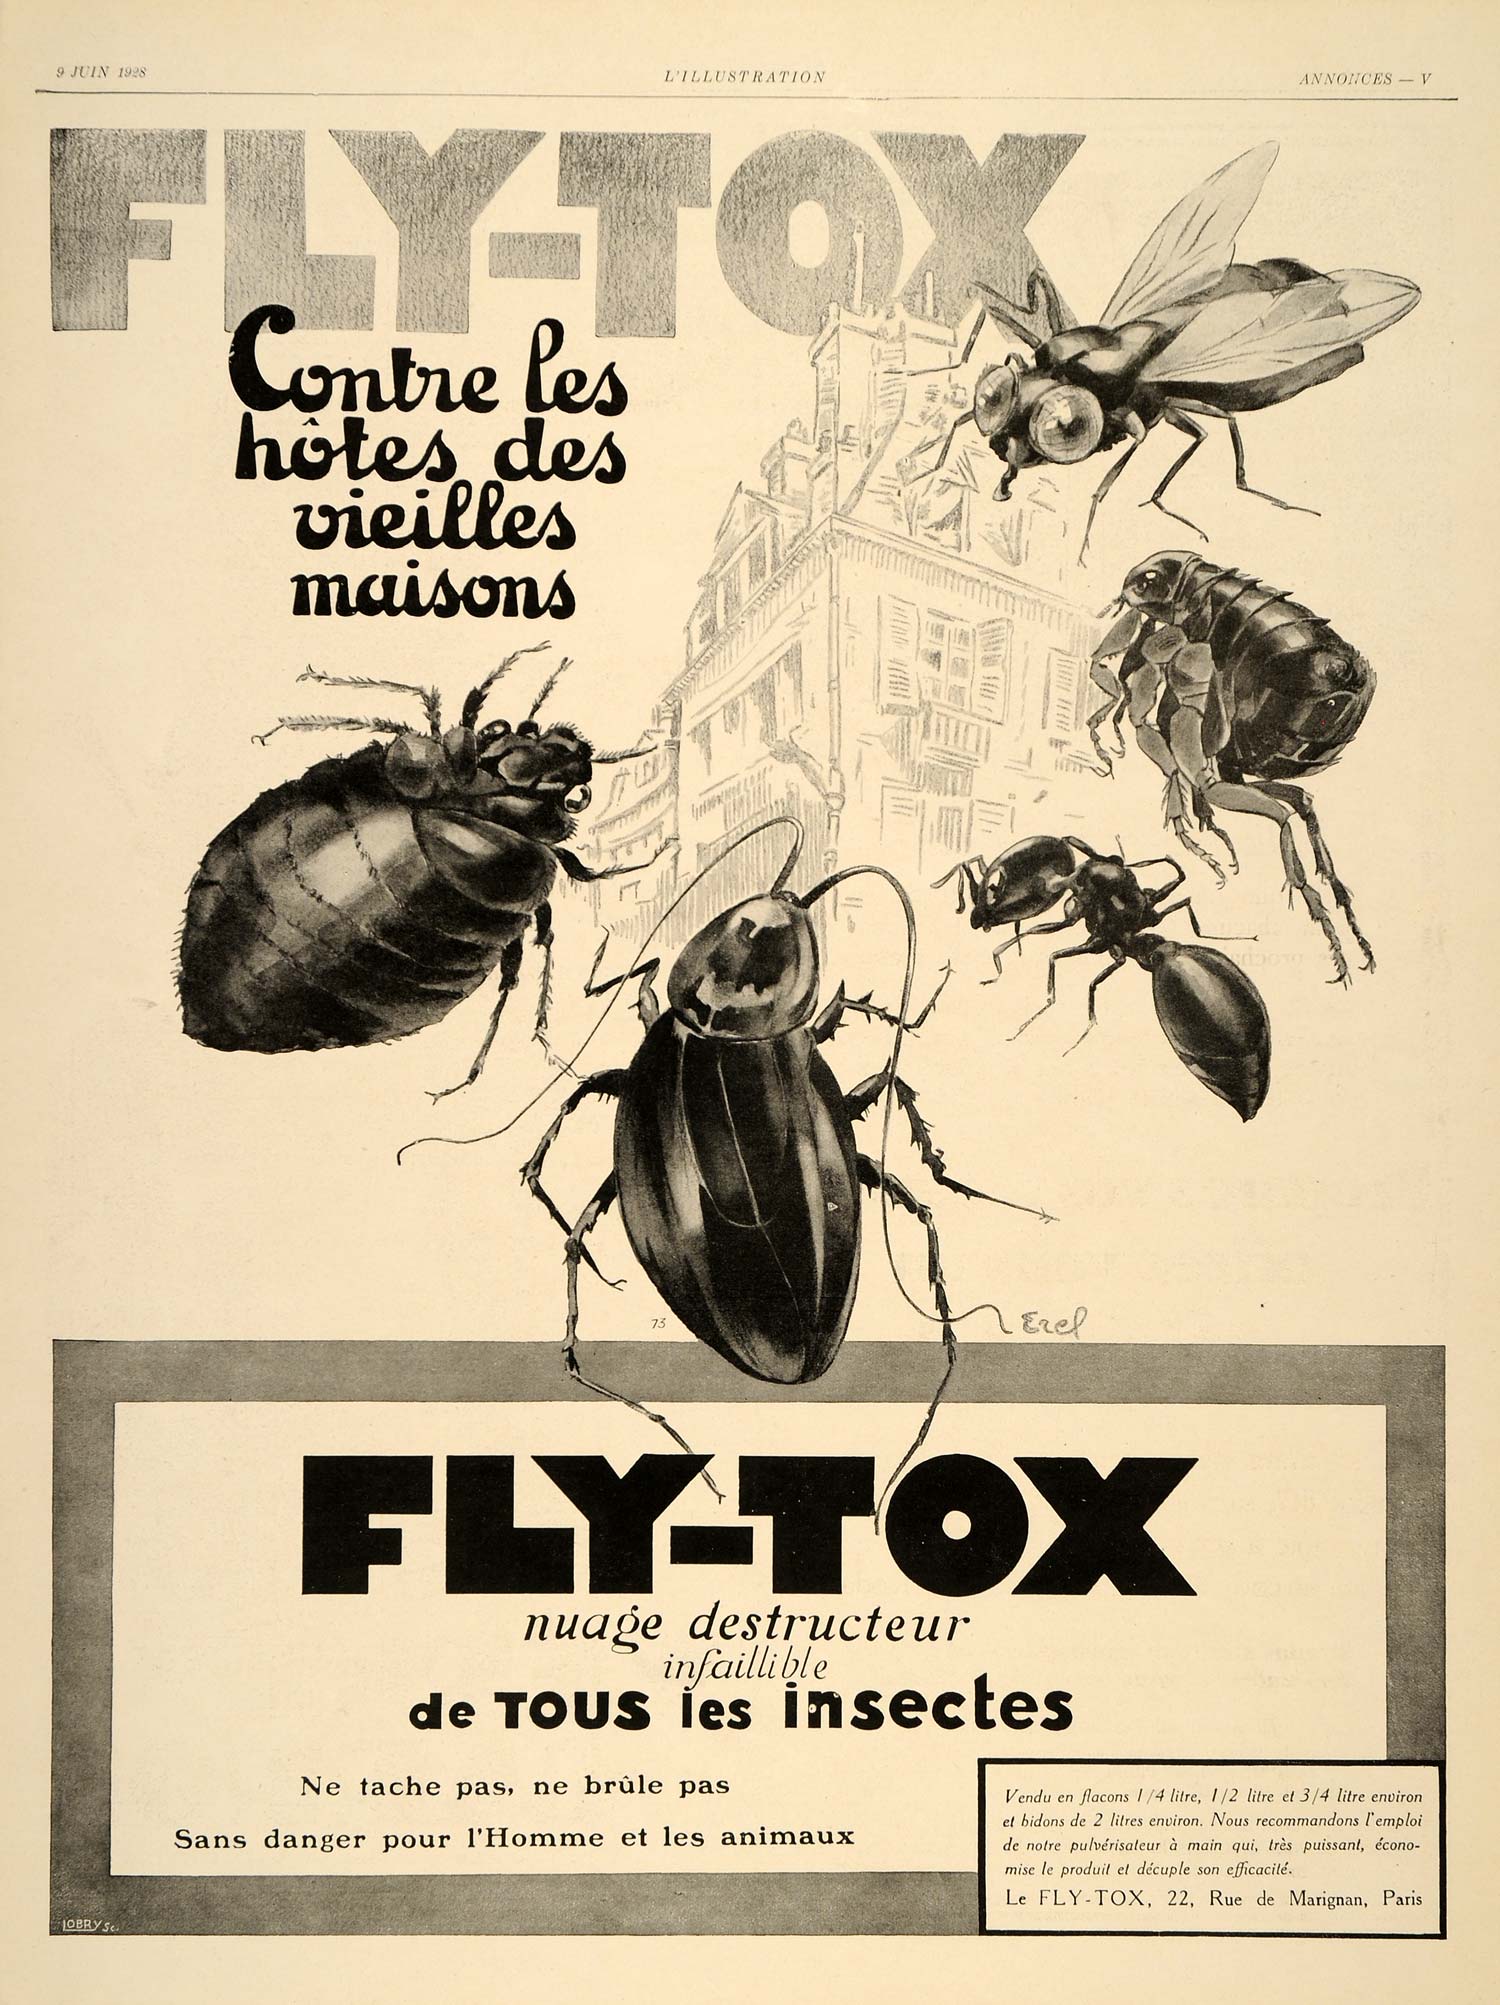 1928 Ad French Fly Tox Insects Repellant Extermination - ORIGINAL ILL3